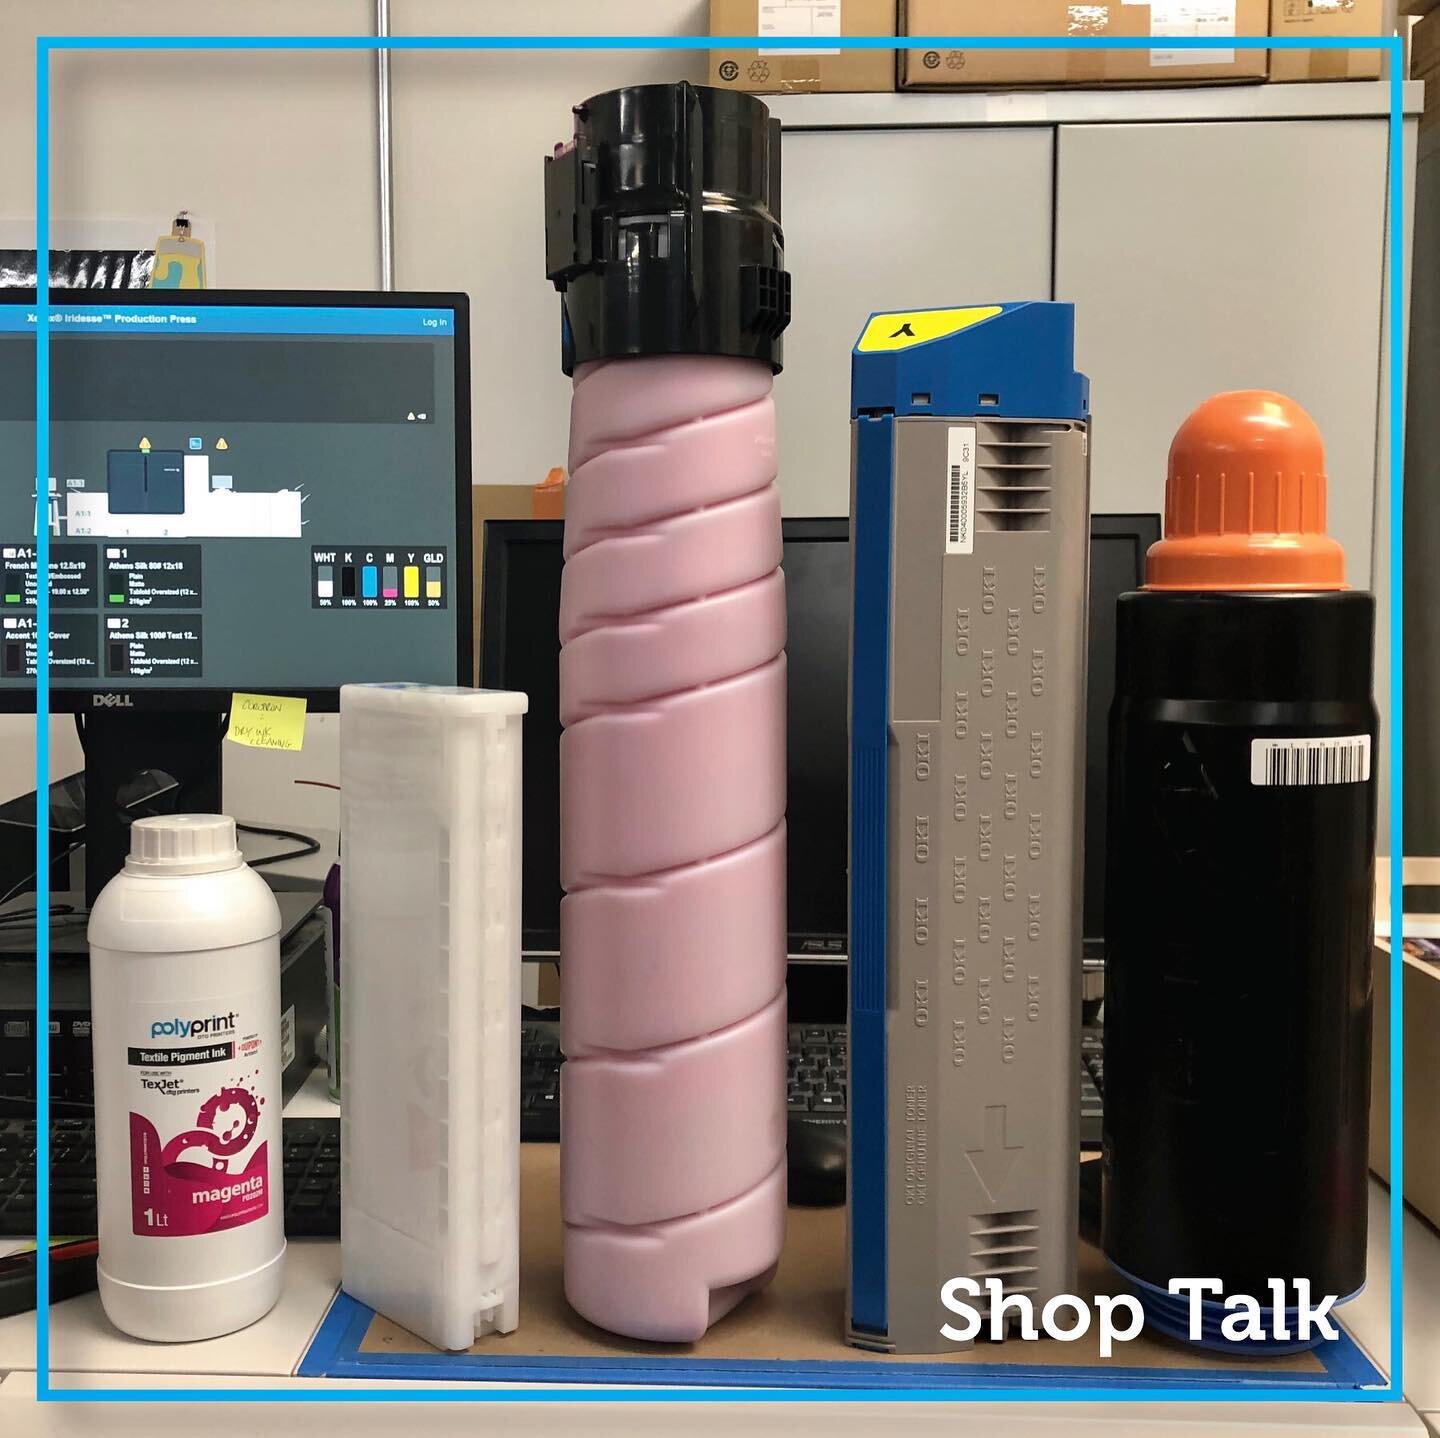 #wpshoptalk! We talk a lot about paper here, this is the other thing we use here: #ink and #toner 
In order: textile ink
Large format epson
Next is out workhorse: the xerox
Envelope printer (only the yellow is triangular, the others are rectangular f